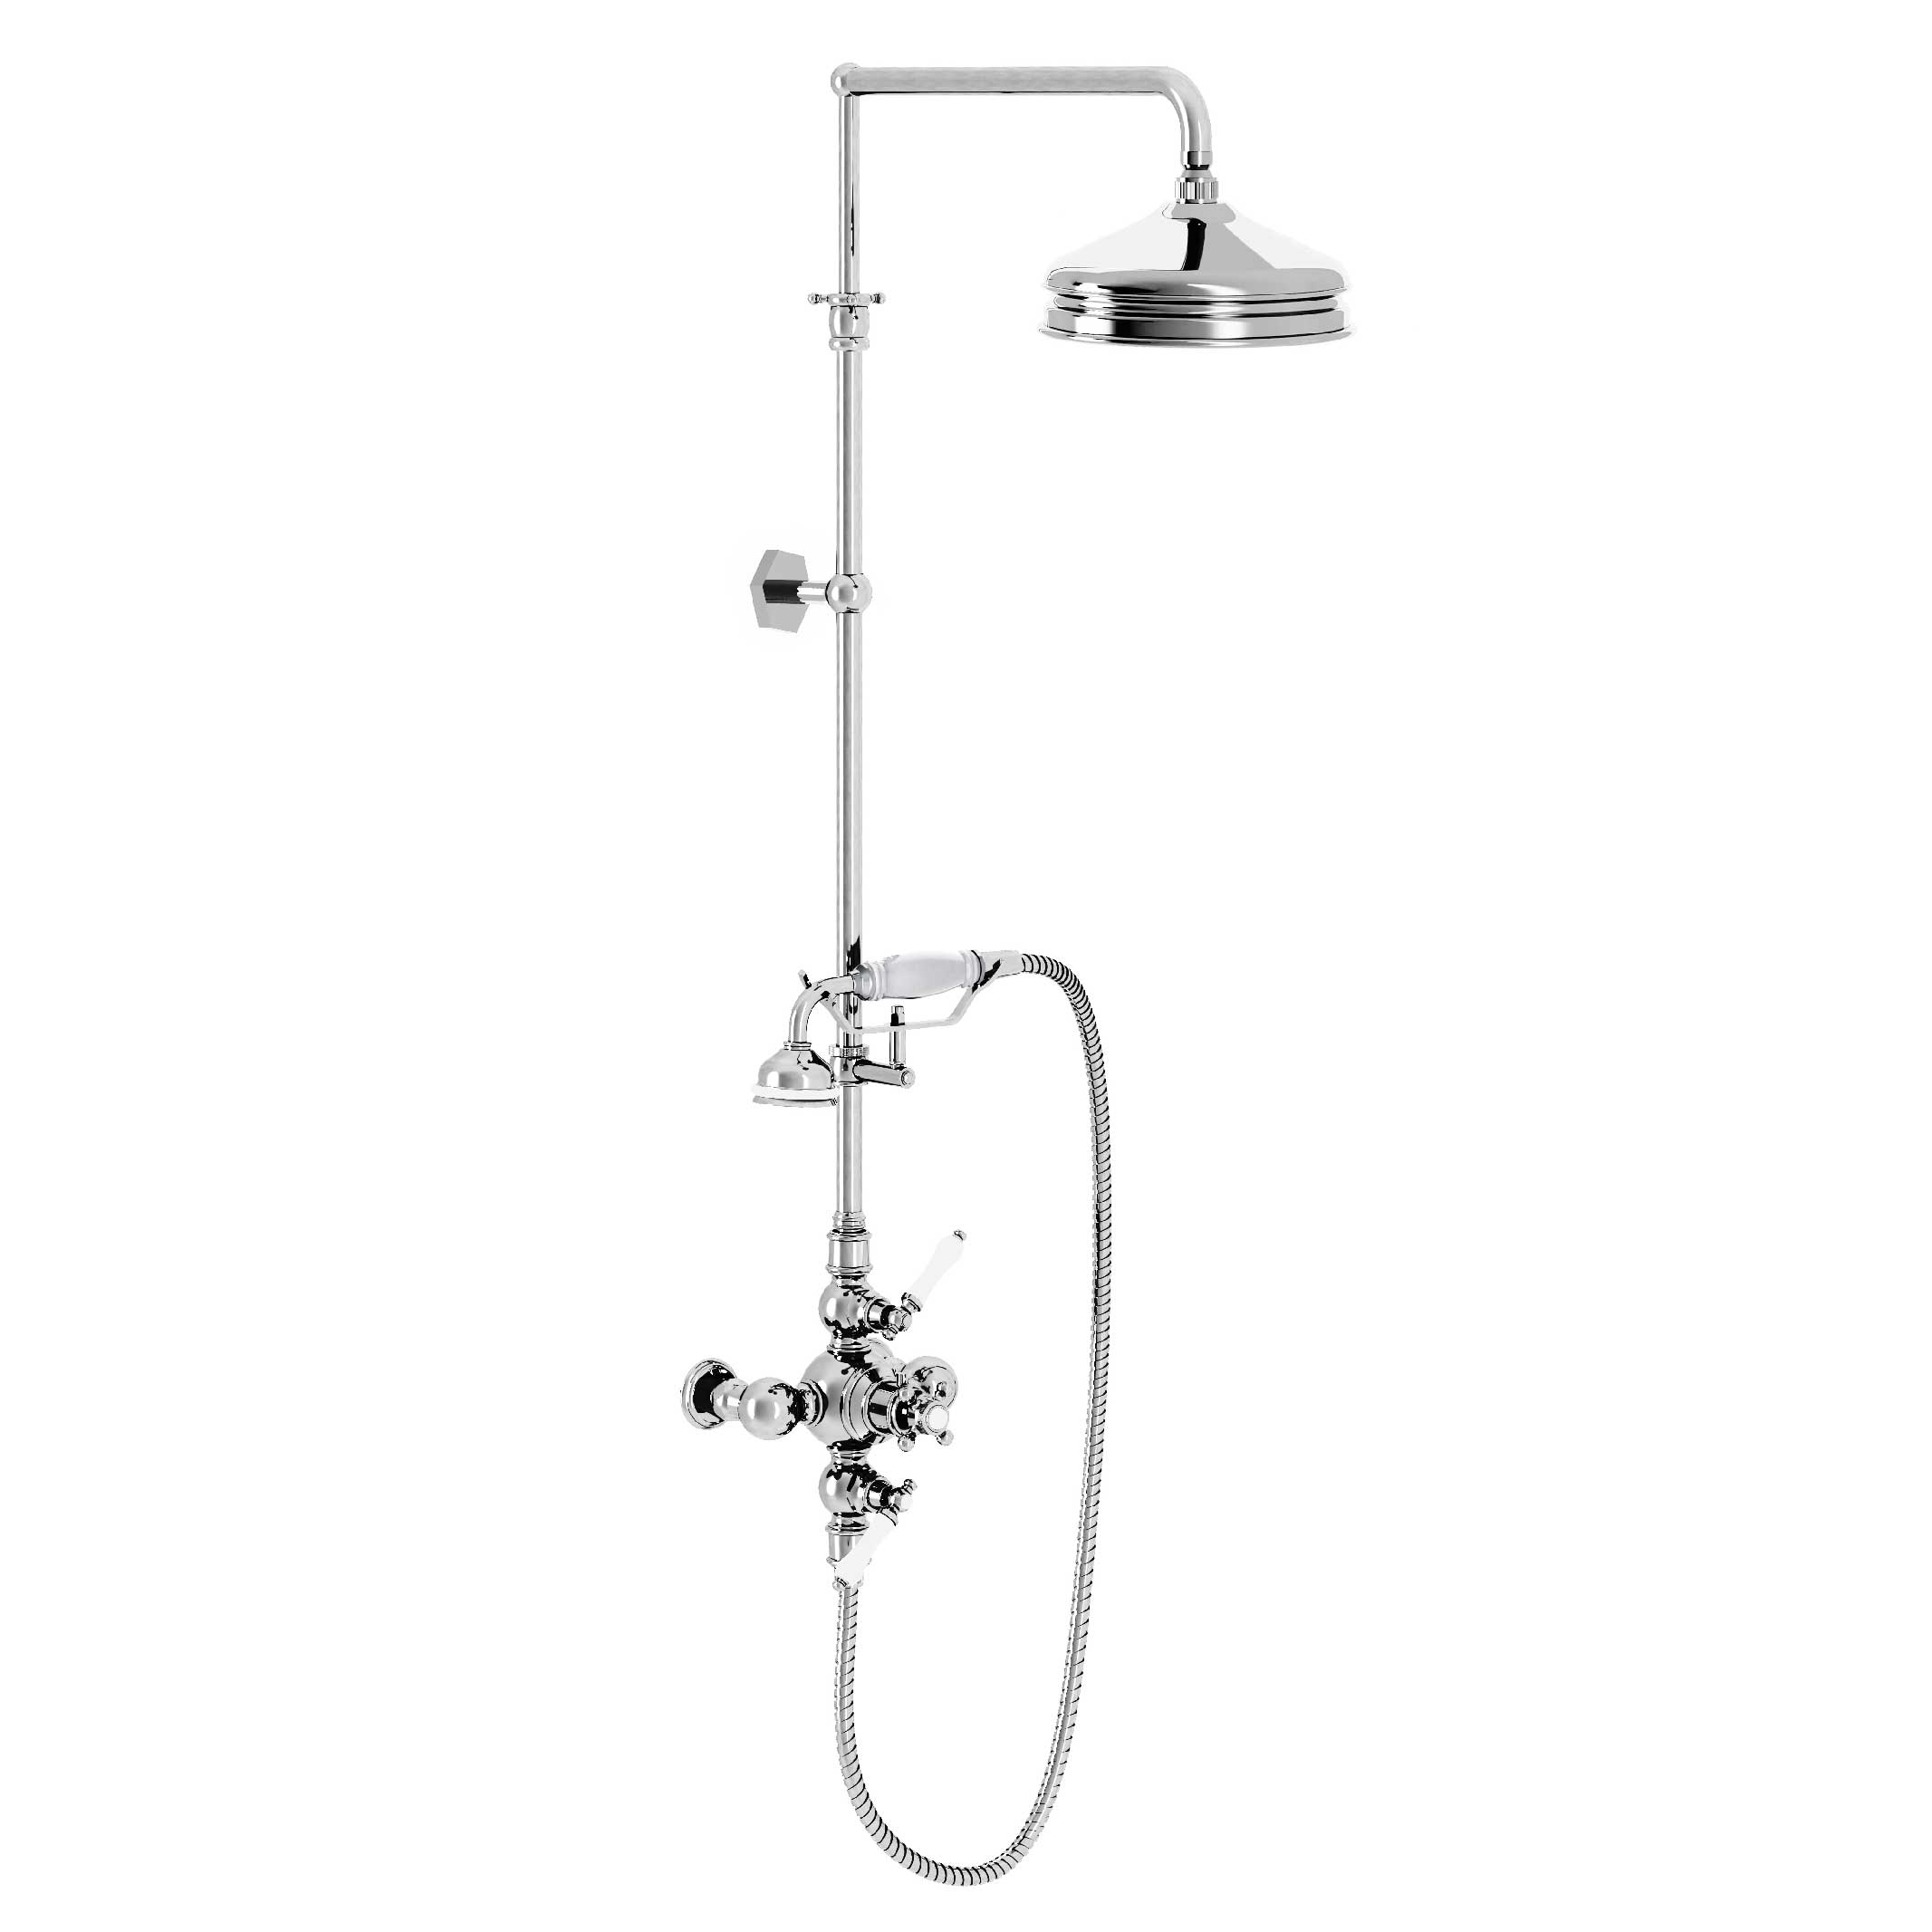 M32-2204T Thermo. shower mixer with column, anti-scaling